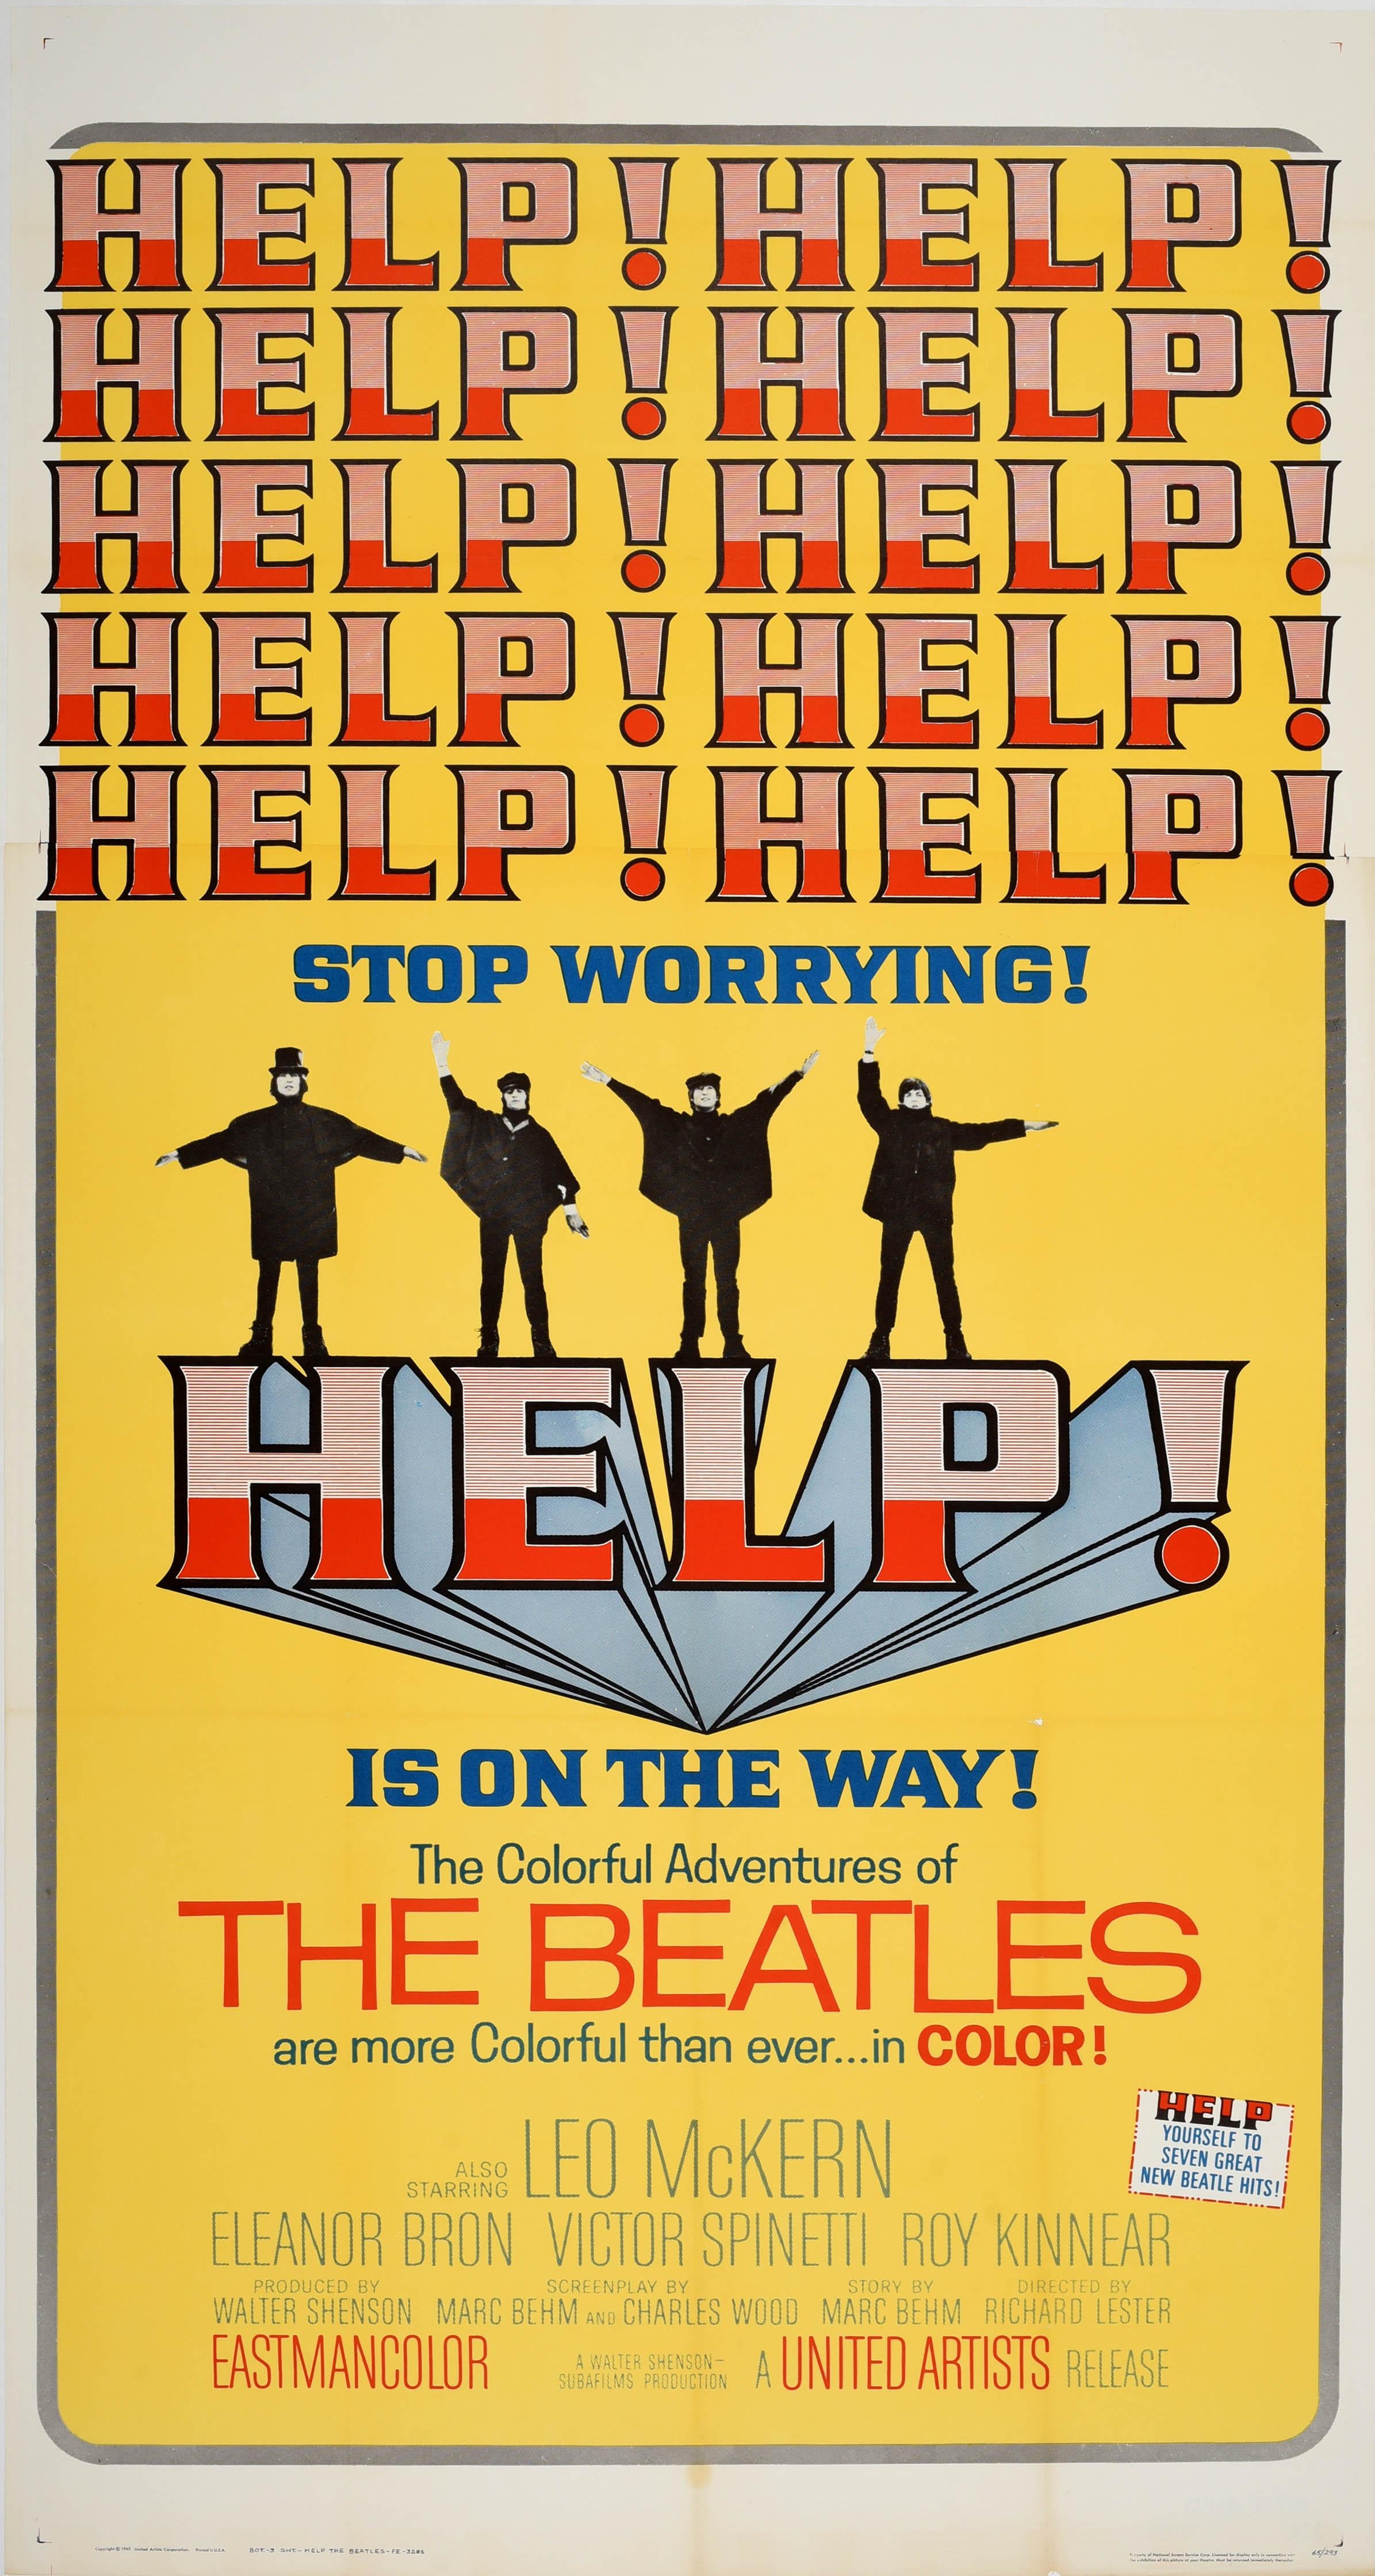 Unknown Print - Original Vintage Poster For The Beatles Help Stop Worrying Music Film Semaphore